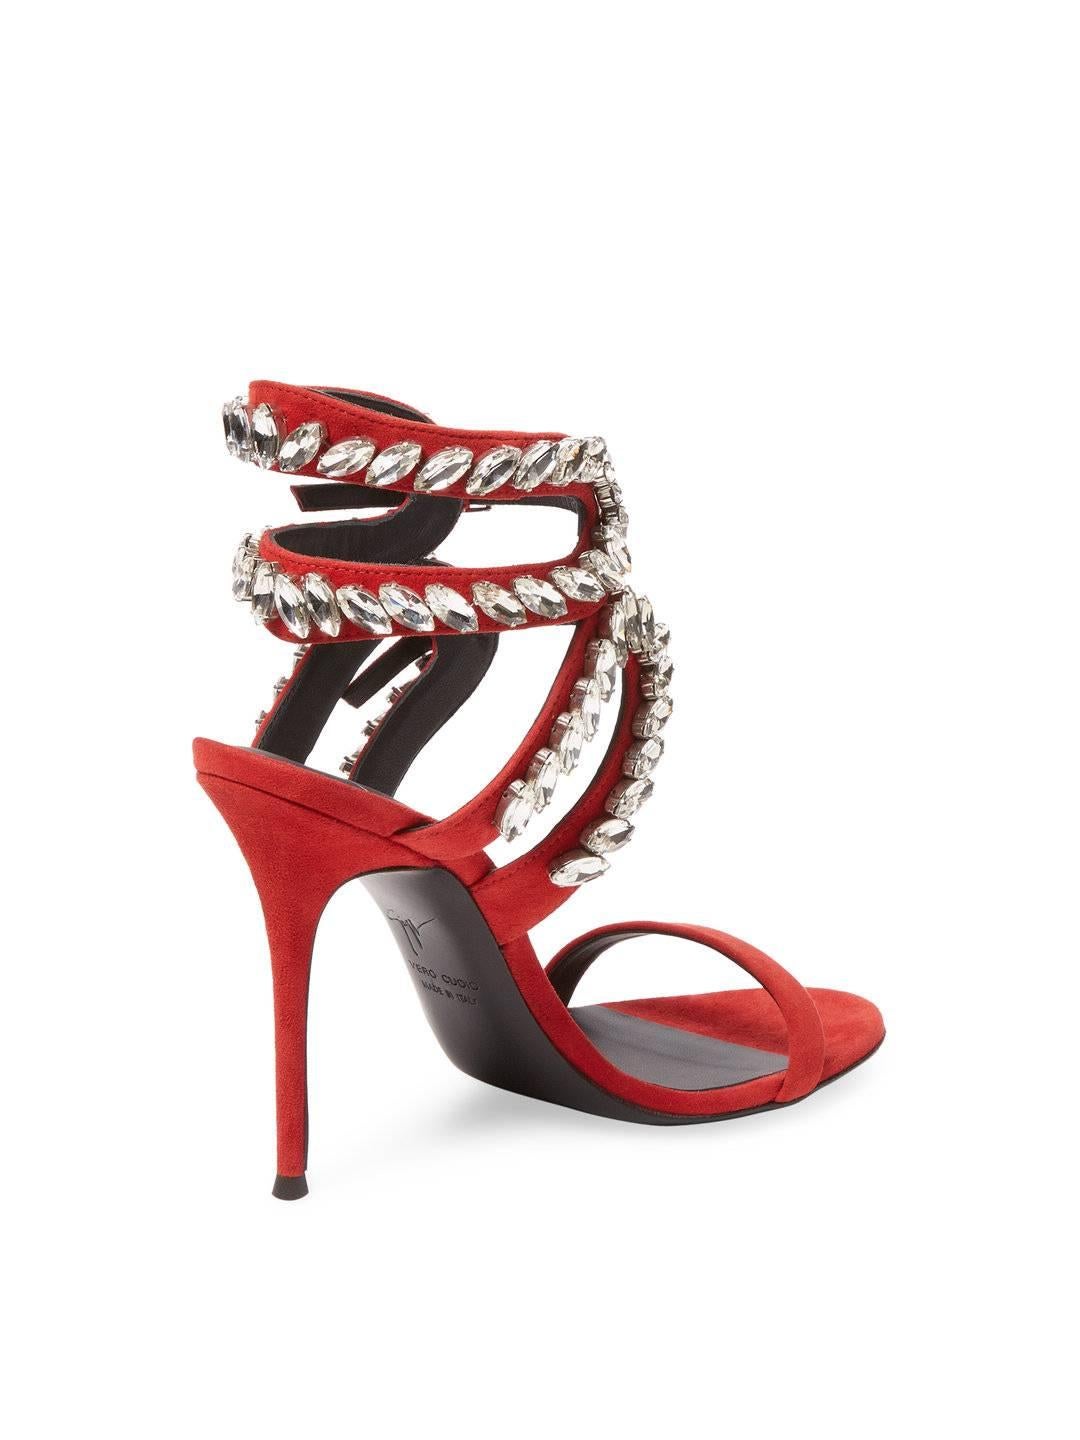 Giuseppe Zanotti New Sold Out Red Suede Crystal Evening Sandals Heels in Box In New Condition In Chicago, IL